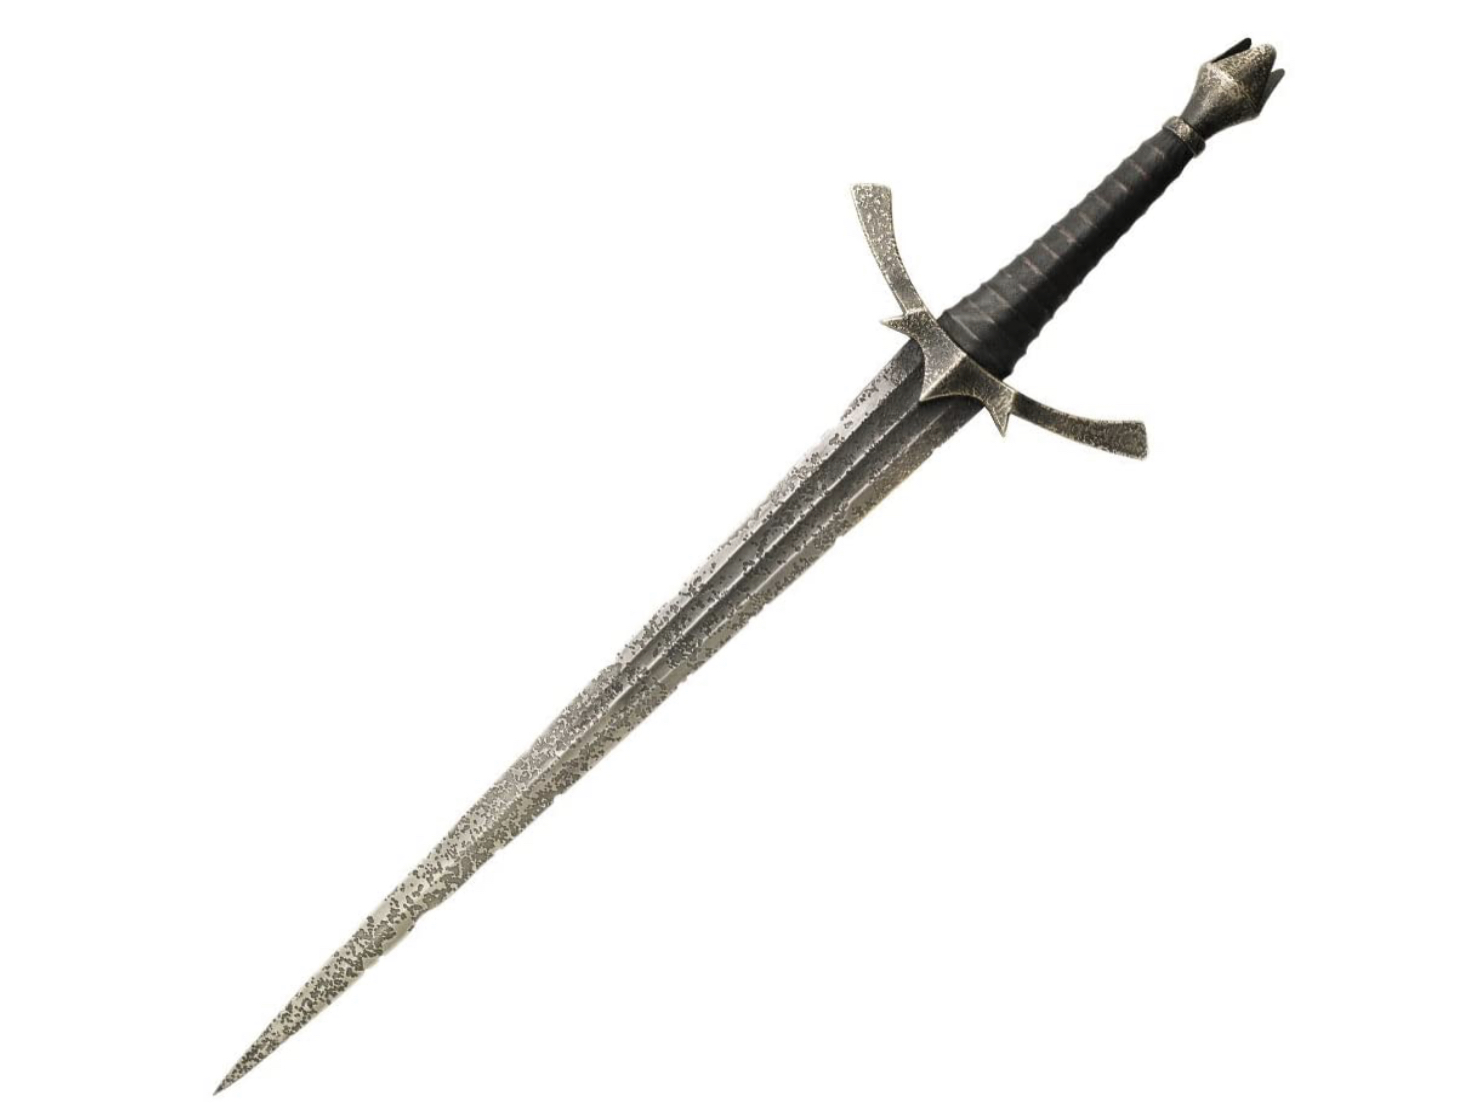 Nazgul’s Morgul-knife from Lord of the Rings